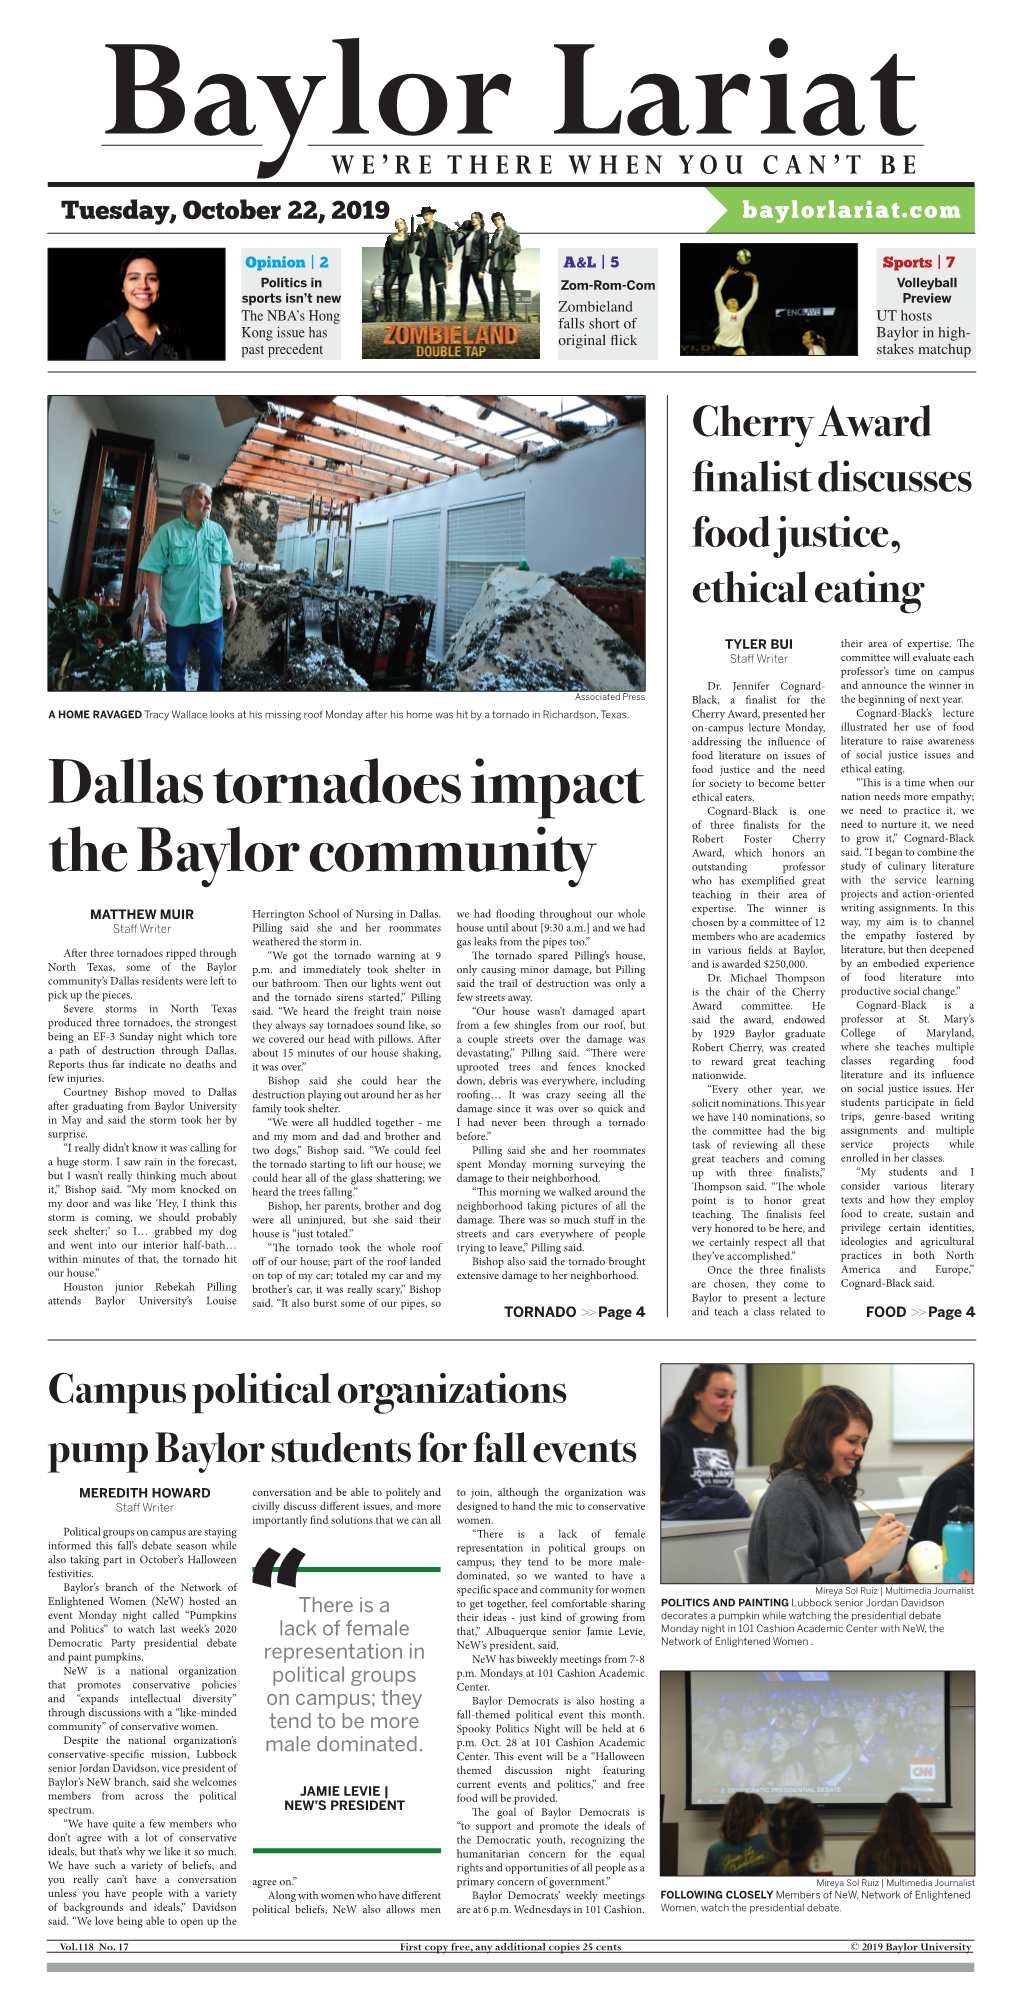 Dallas Tornadoes Impact the Baylor Community